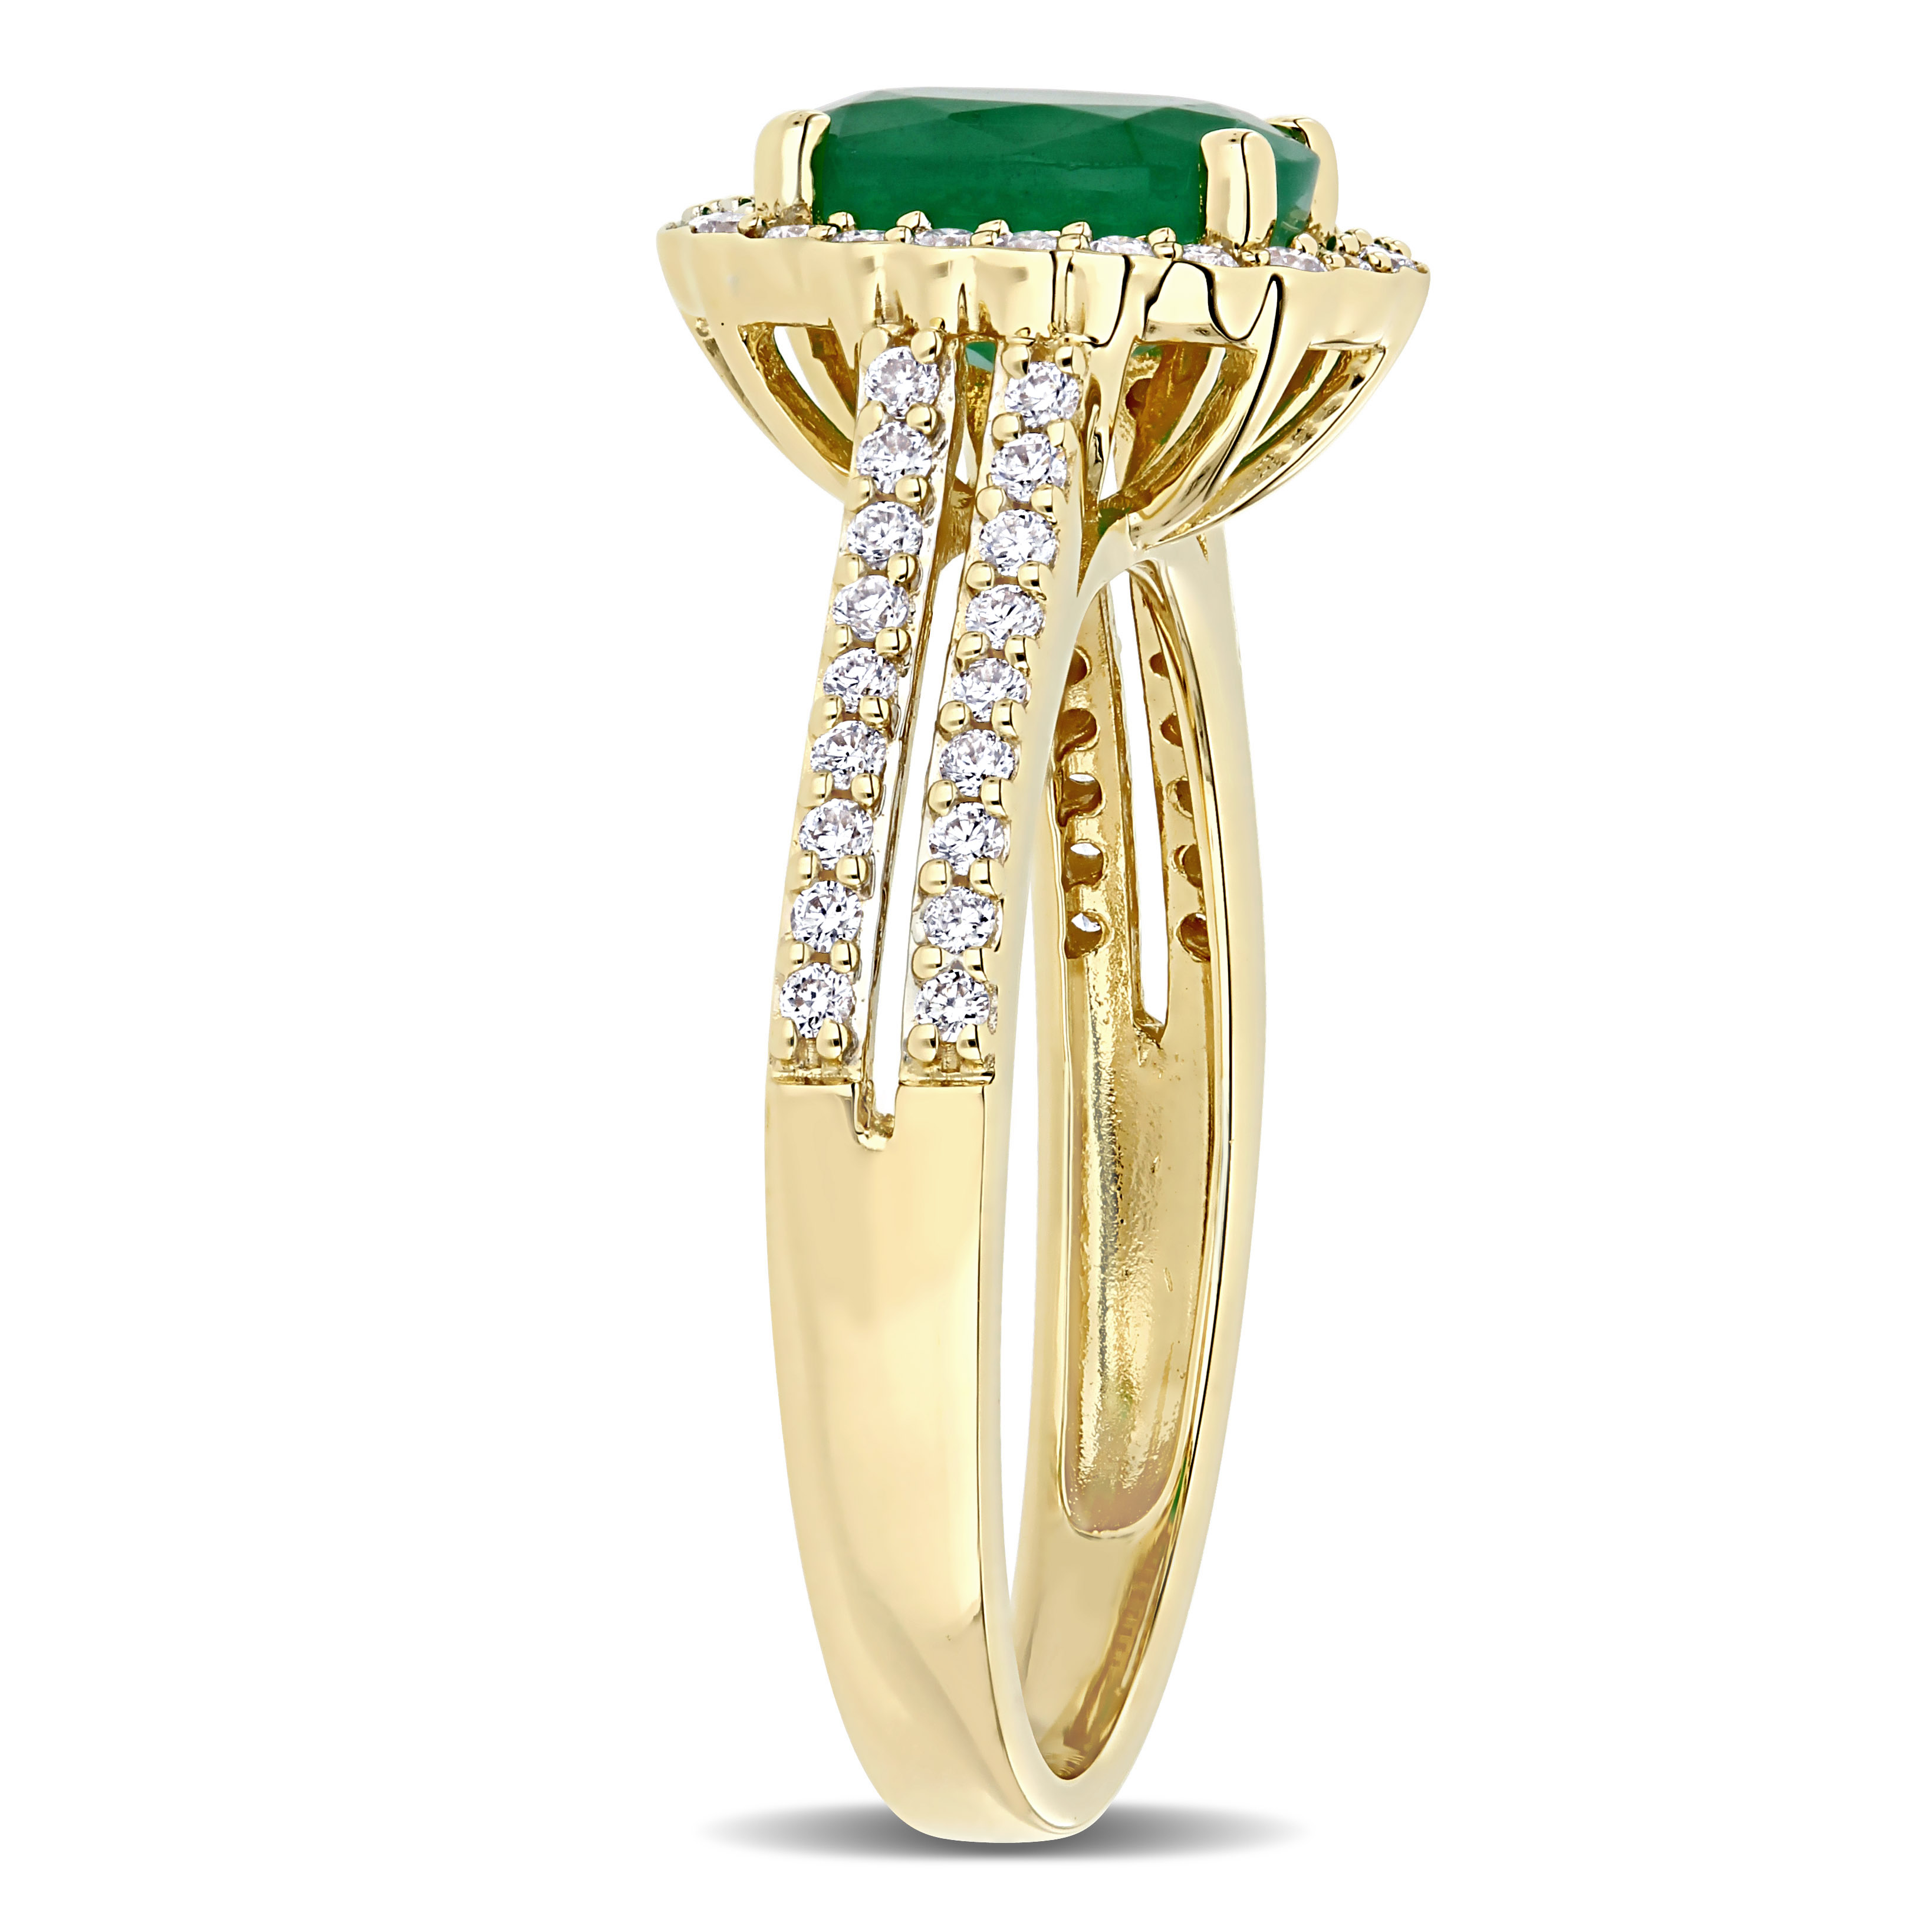 Emerald and 1/3 CT TW Diamond Oval Halo Engagement Ring in 14k Yellow Gold